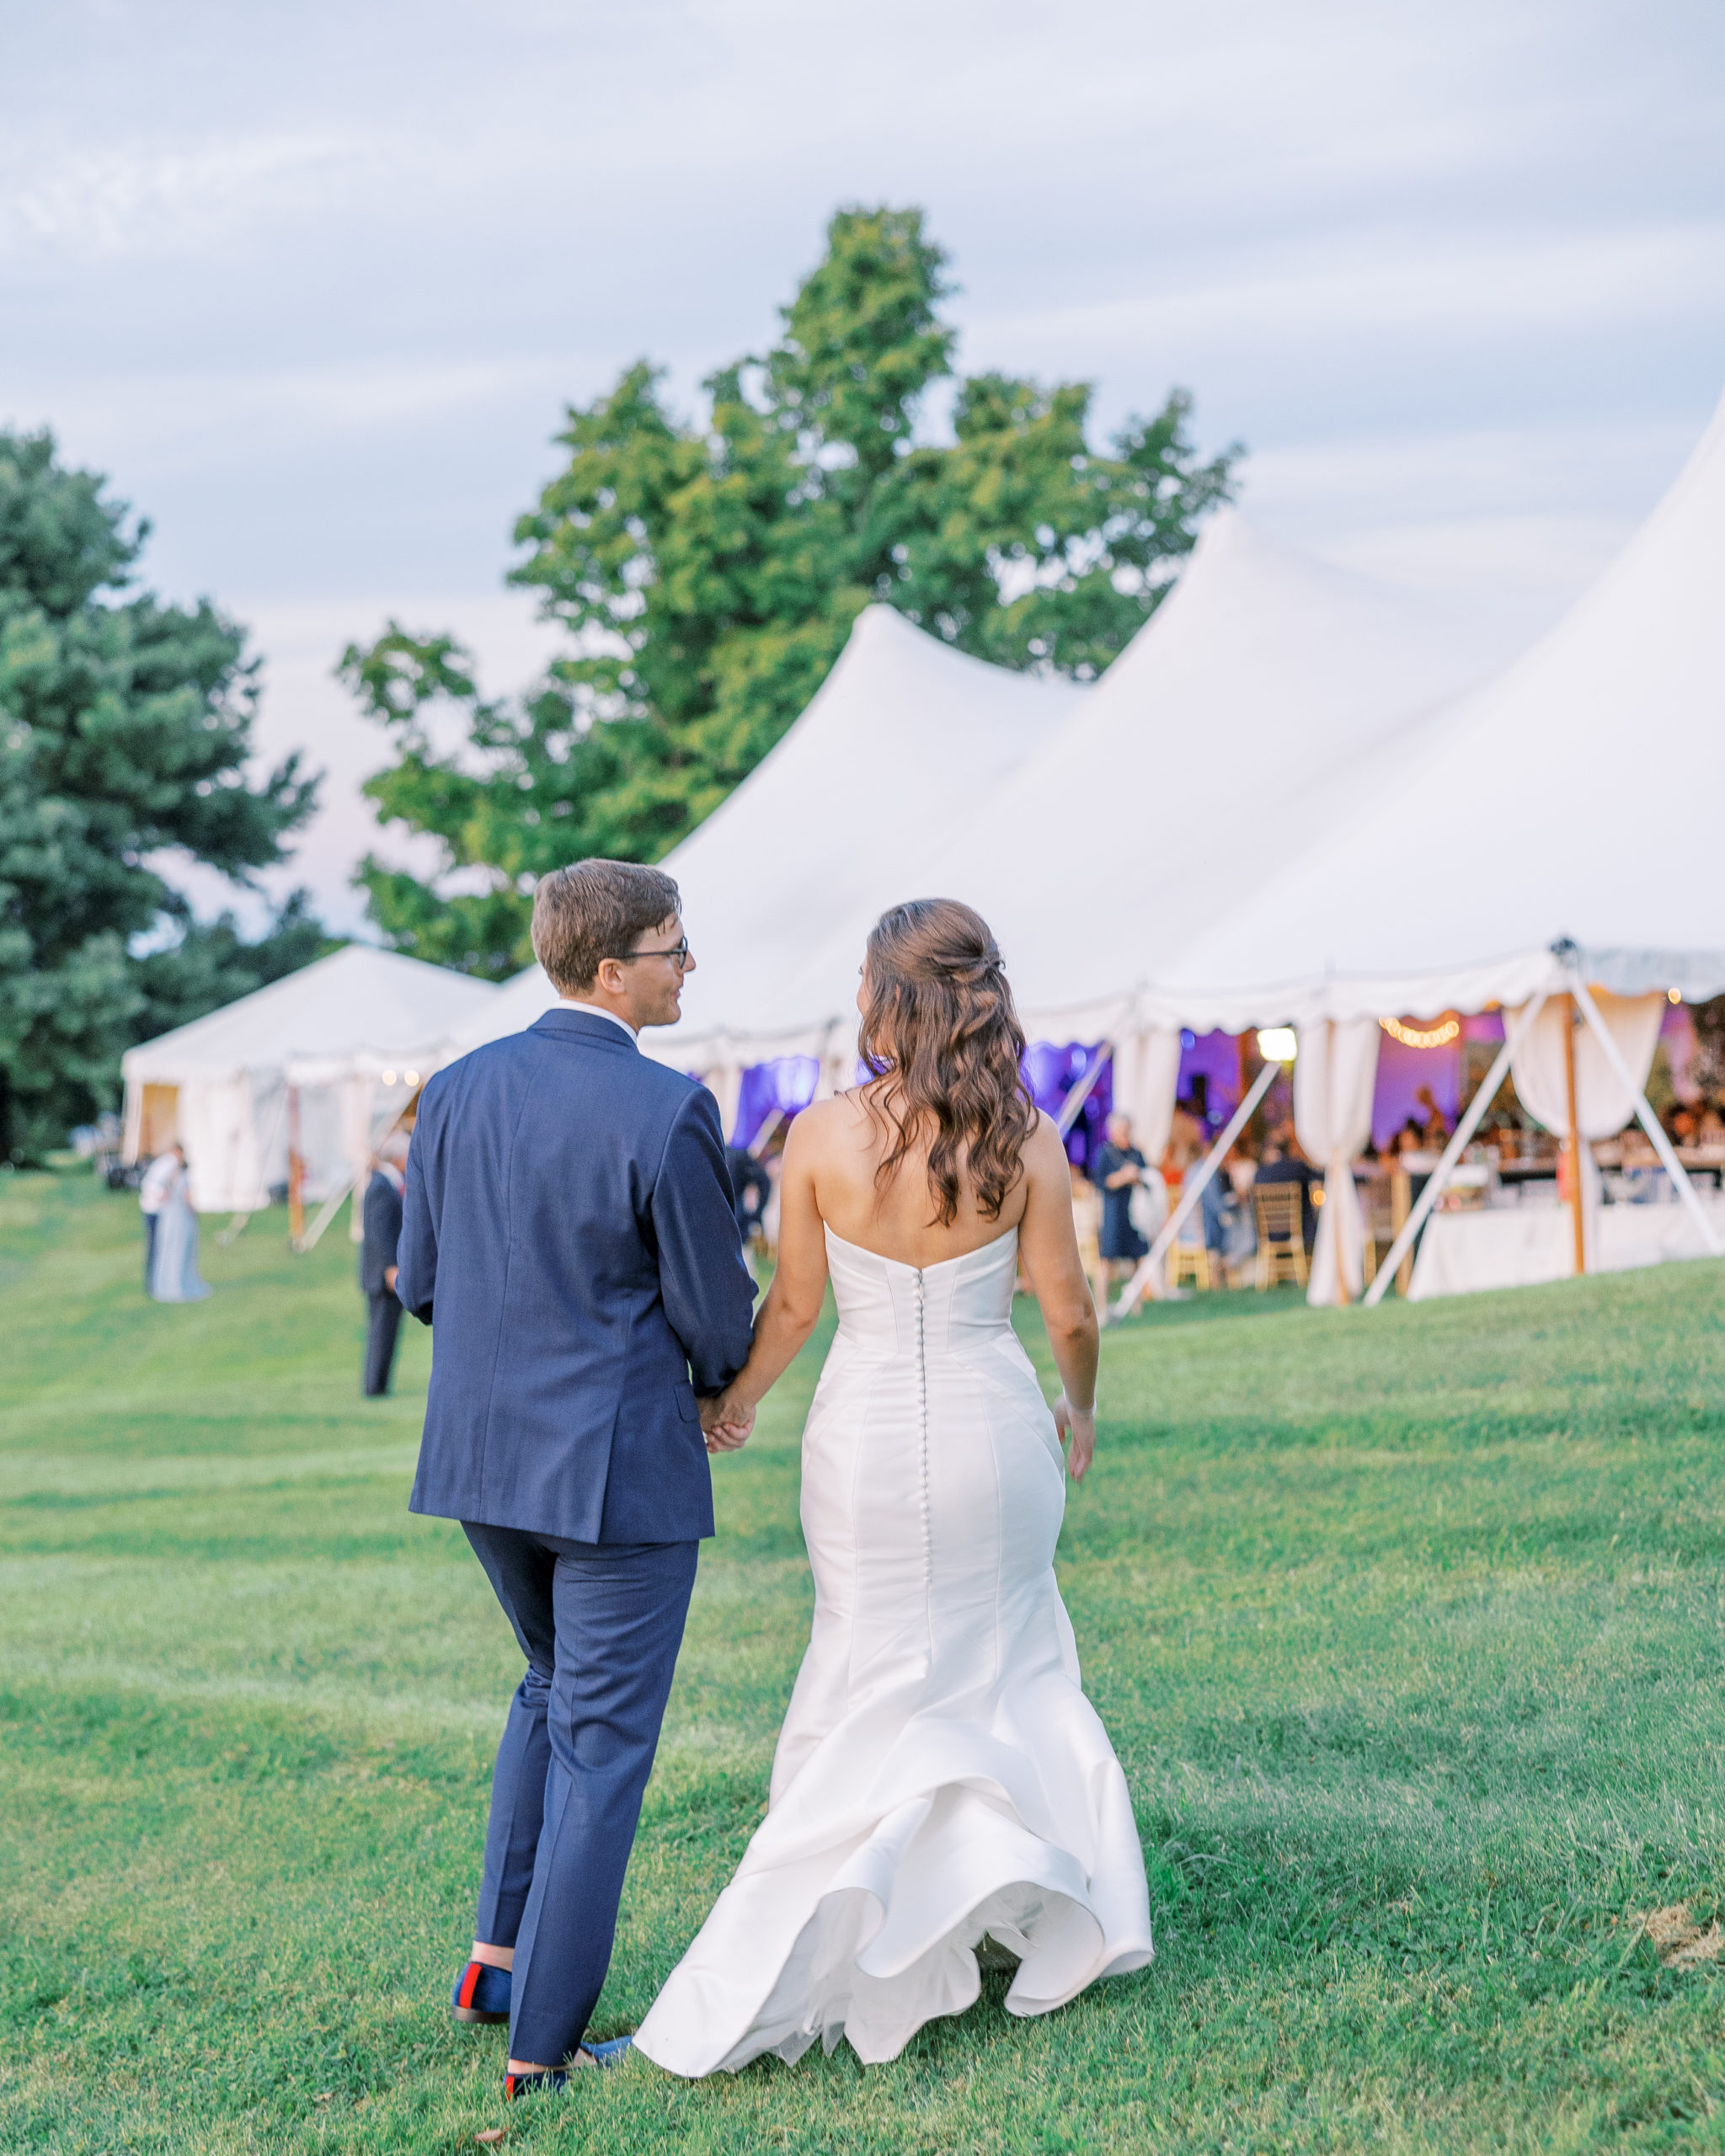 Bride and groom hold hands as they walk towards wedding reception with large white tents for Charlottesville Wedding Photography
